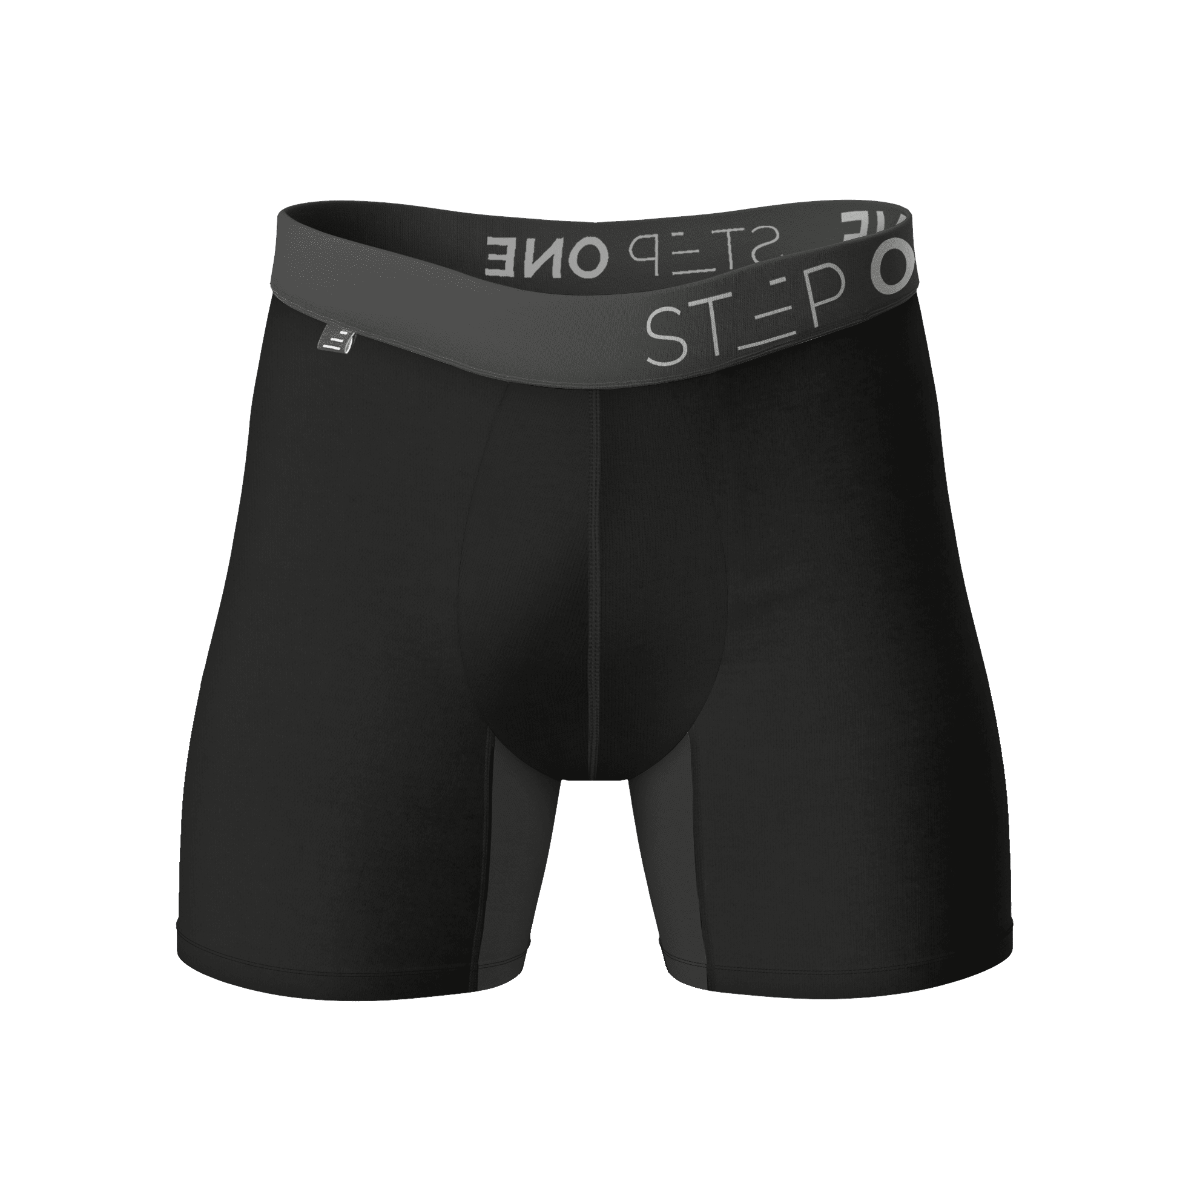 Boxer Underwear For Men's One Size Black – The Cut Price